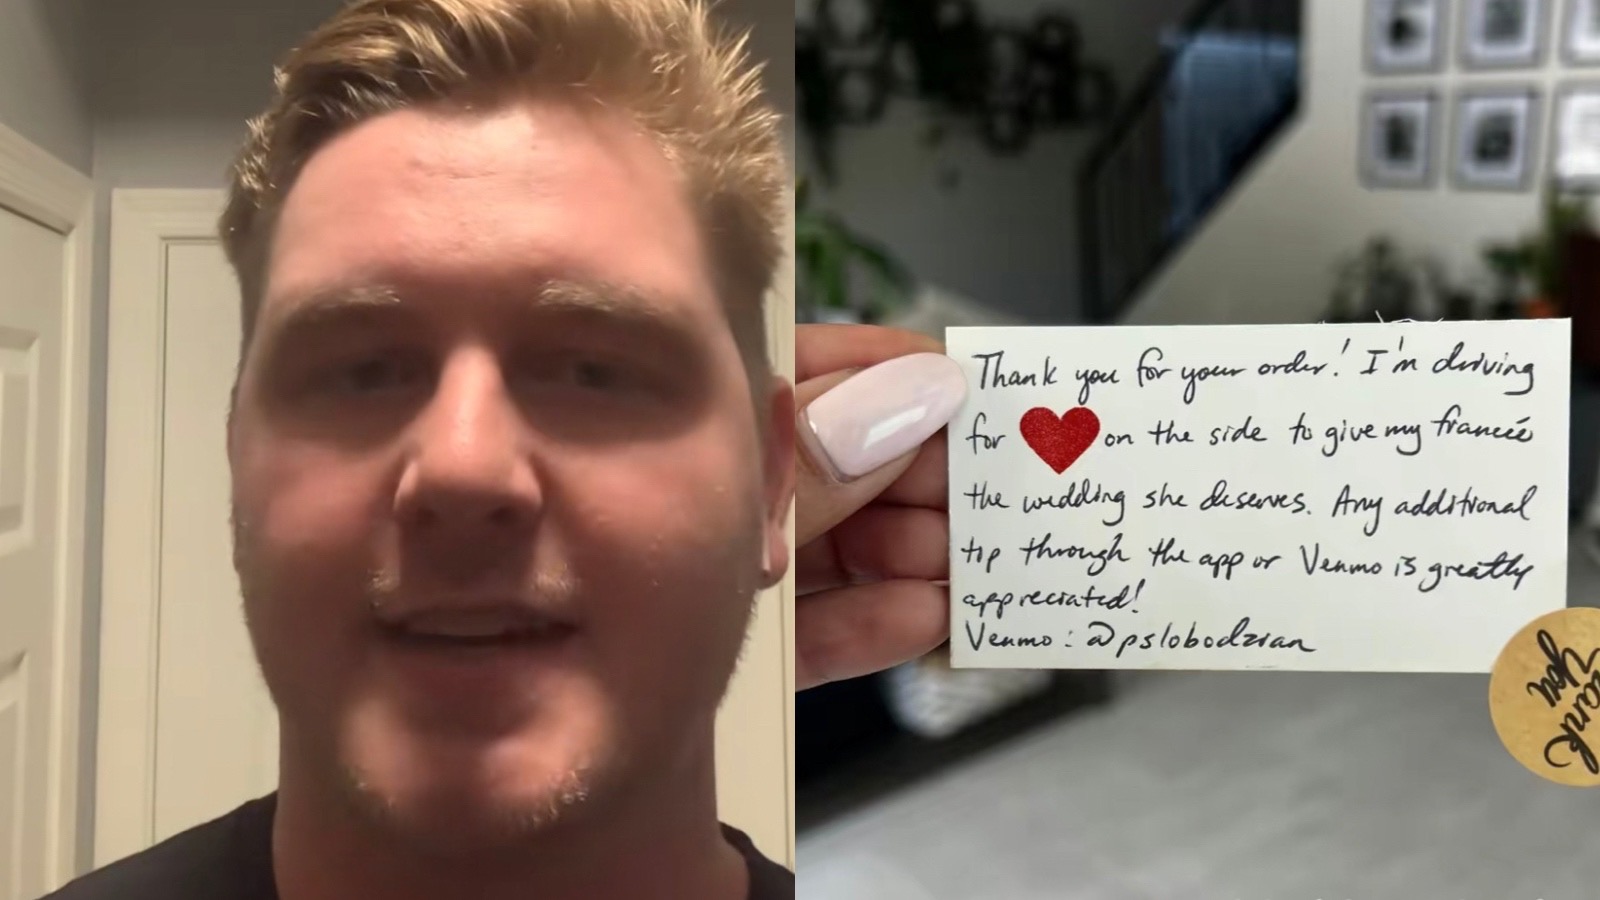 TikTok pays off Uber Eats driver’s wedding thanks to heartfelt note in Chipotle order